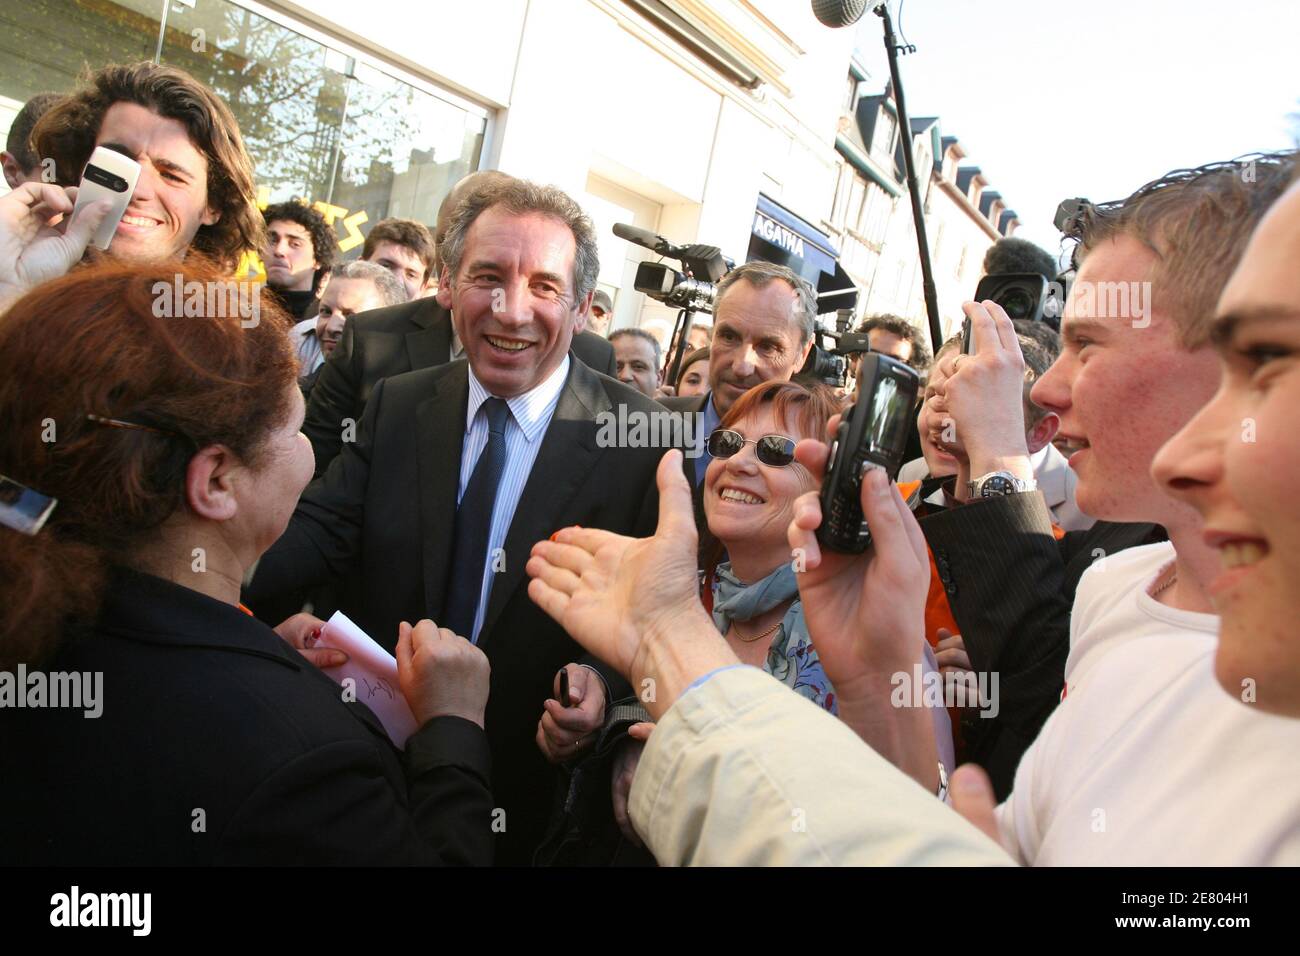 UDF leader and presidential candidate Francois Bayrou during a visit in Rouen, France, on April 19, 2007. Photo by Corentin Fohlen/ABACAPRESS.COM Stock Photo